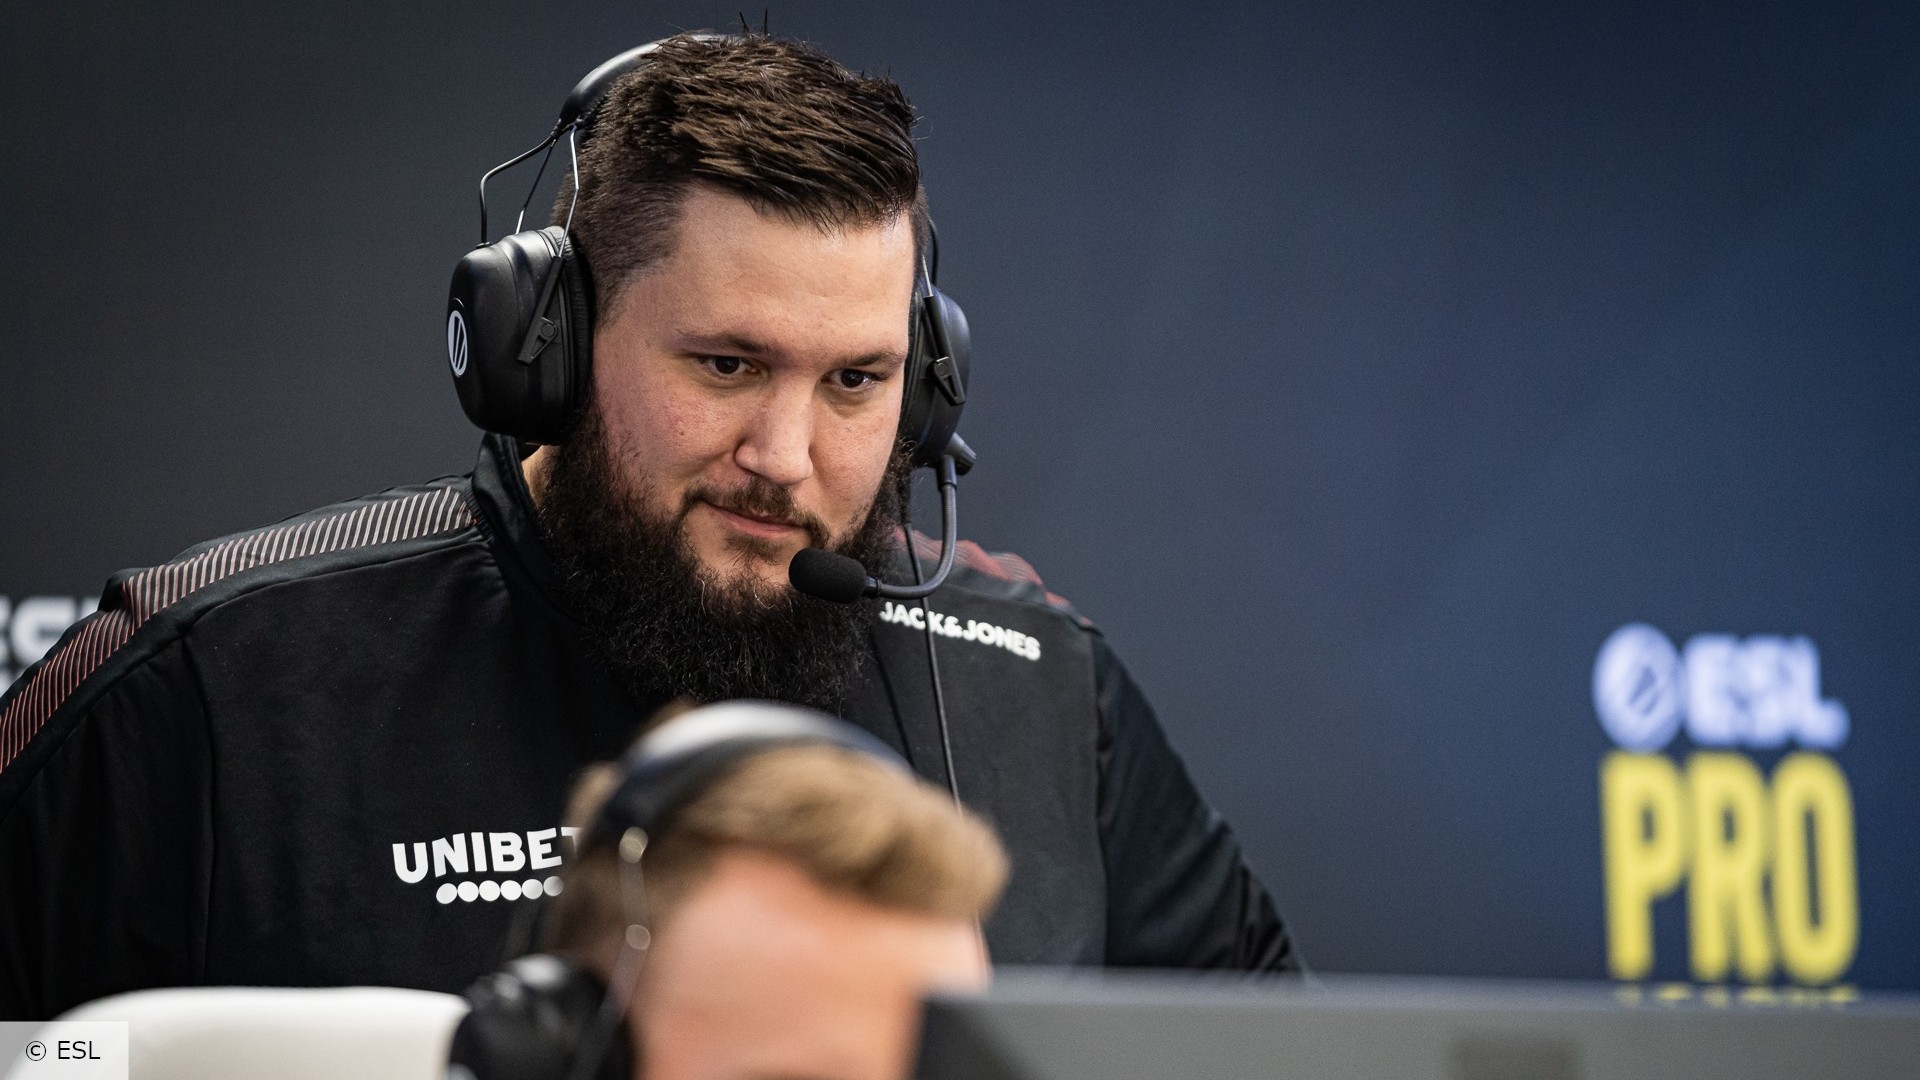 Zonic from Astralis received less prizes than players